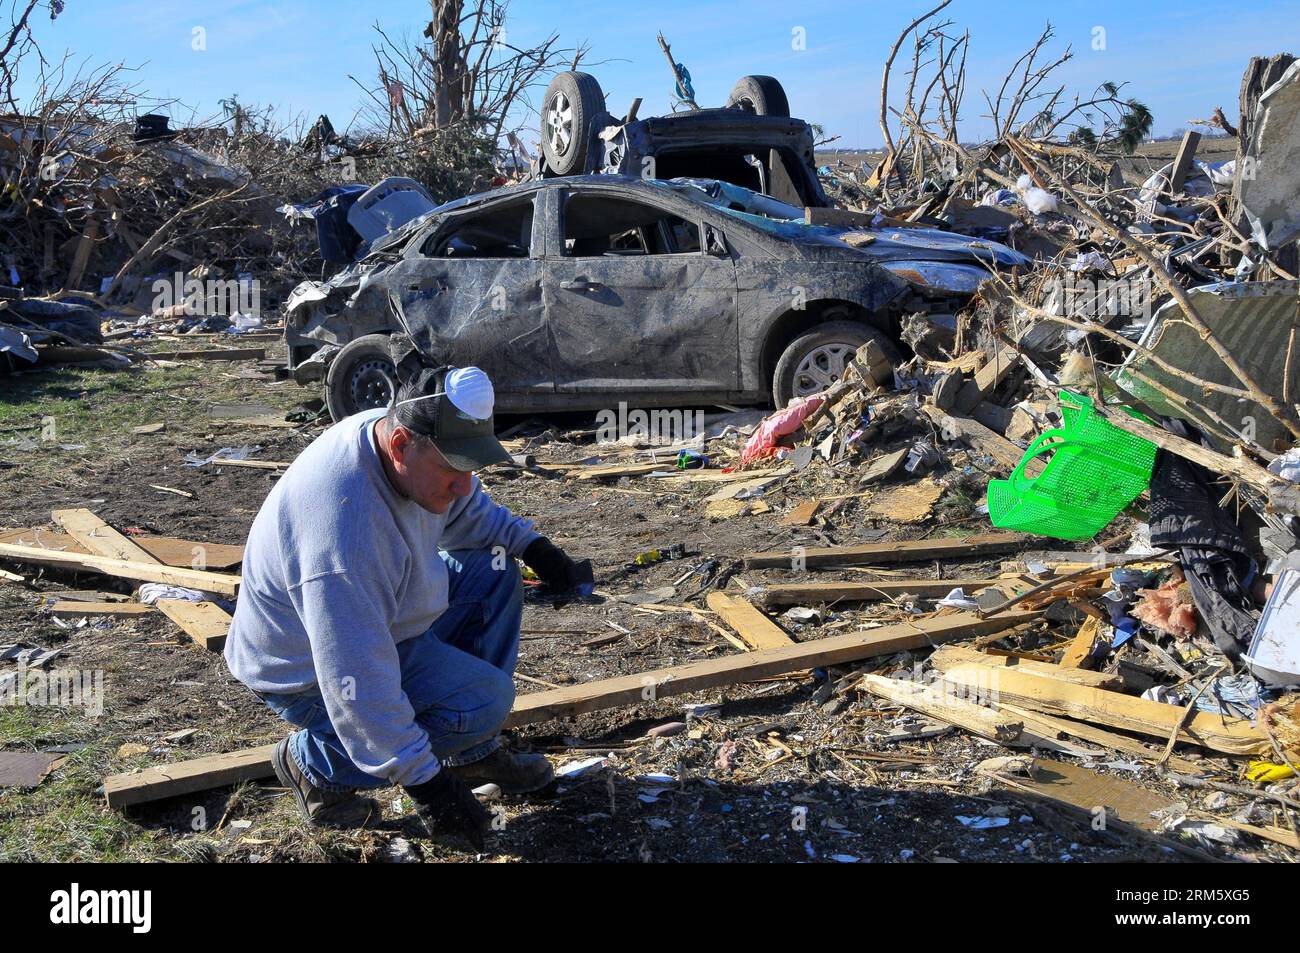 Bildnummer: 60732978  Datum: 19.11.2013  Copyright: imago/Xinhua ILLINOIS, Nov. 19, 2013 (Xinhua) -- A local resident works in ruins after a tornado attack in the town of Washington in Illinois, the United States, on Nov. 19, 2013. At least 16 were killed during tornado attacks on Sunday, according to the National Weather Service. (Xinhua/Zhang Baoping)(ybg) US-ILLINOIS-TORNADO PUBLICATIONxNOTxINxCHN Gesellschaft USA Naturkatastrophe x0x xsk 2013 quer Aufmacher premiumd     60732978 Date 19 11 2013 Copyright Imago XINHUA Illinois Nov 19 2013 XINHUA a Local Resident Works in Ruins After a Torna Stock Photo